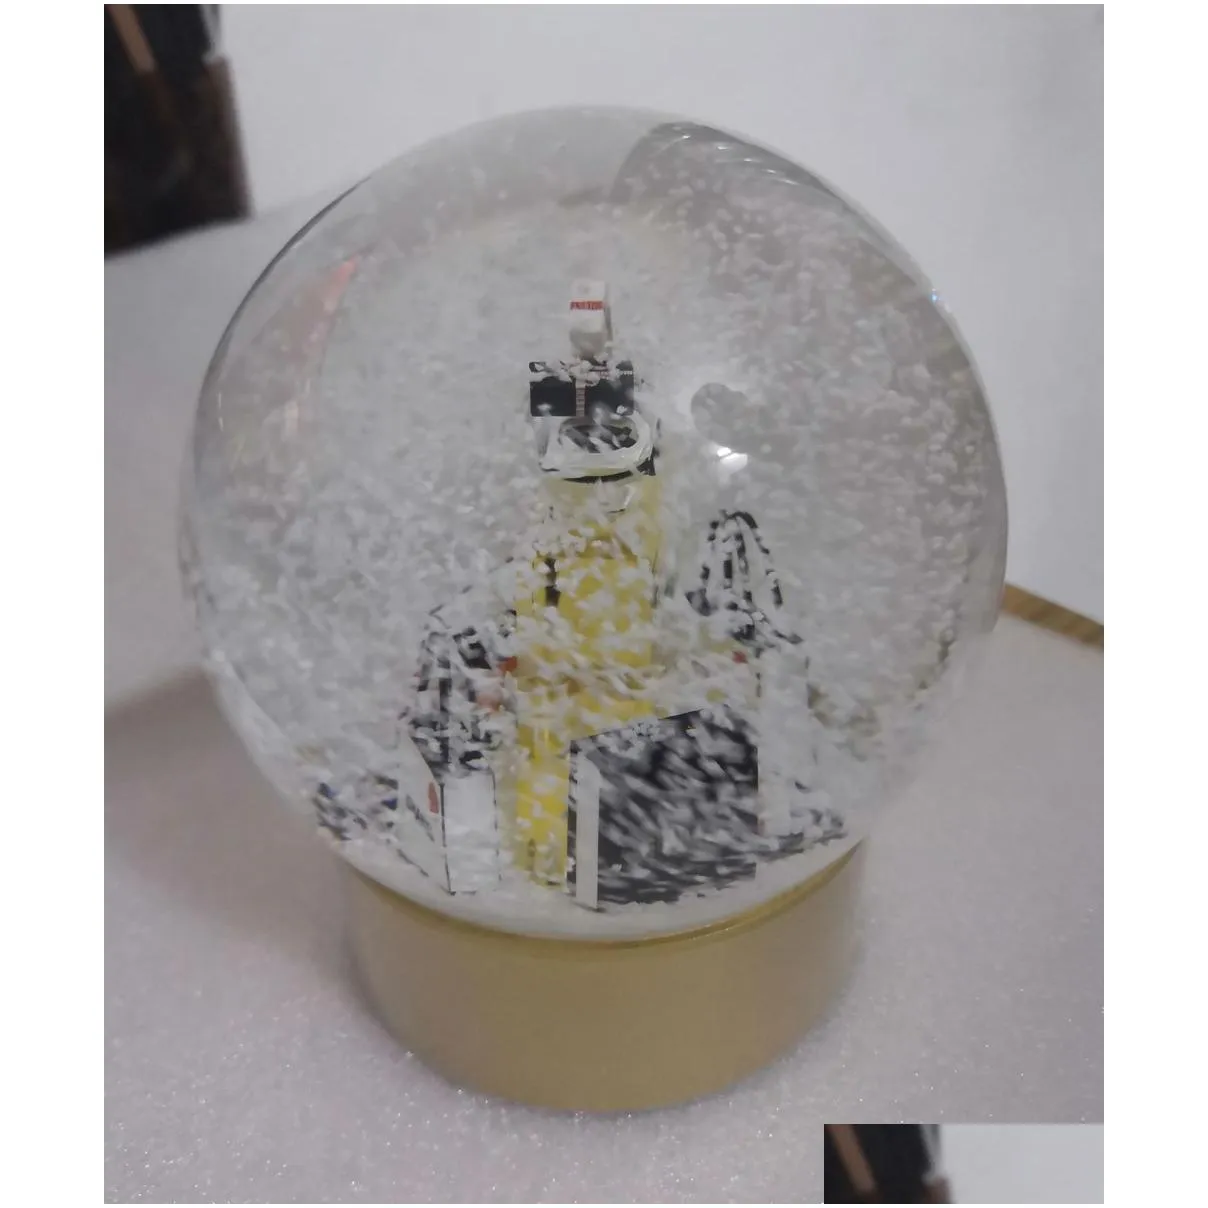 2022 edition c classics golden christmas snow globe with perfume bottle inside crystal ball for special birthday novelty vip gift